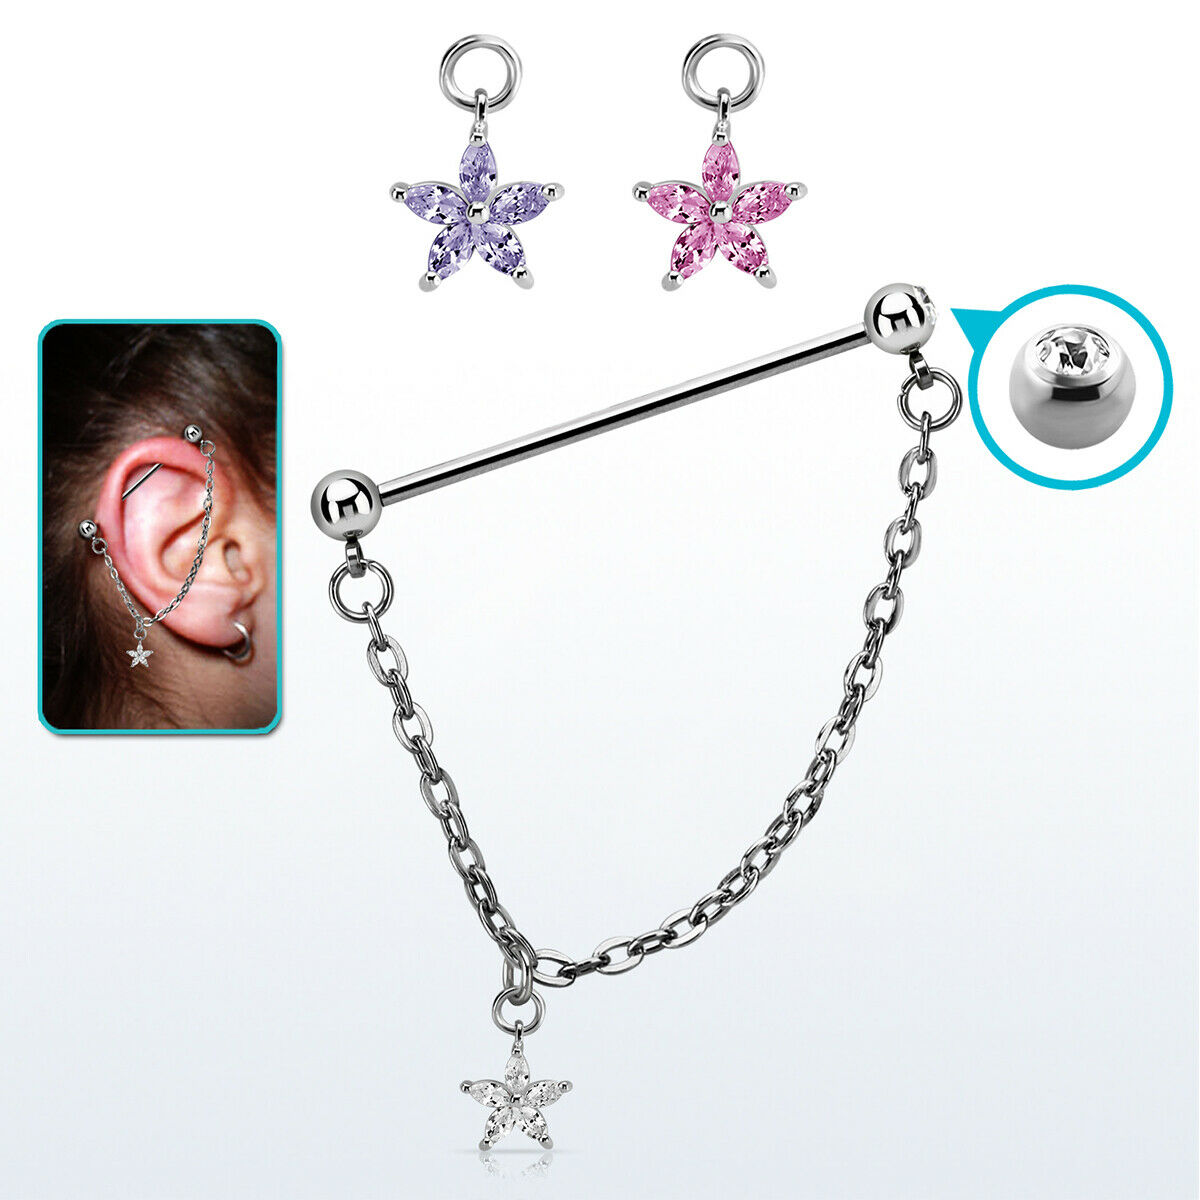 Ear industrial barbell 14g/1.6mm with a 5mm press fit gem ball and a 5mm steel ball linked with a chain with cubic zirconia stones in a star shape dangling part